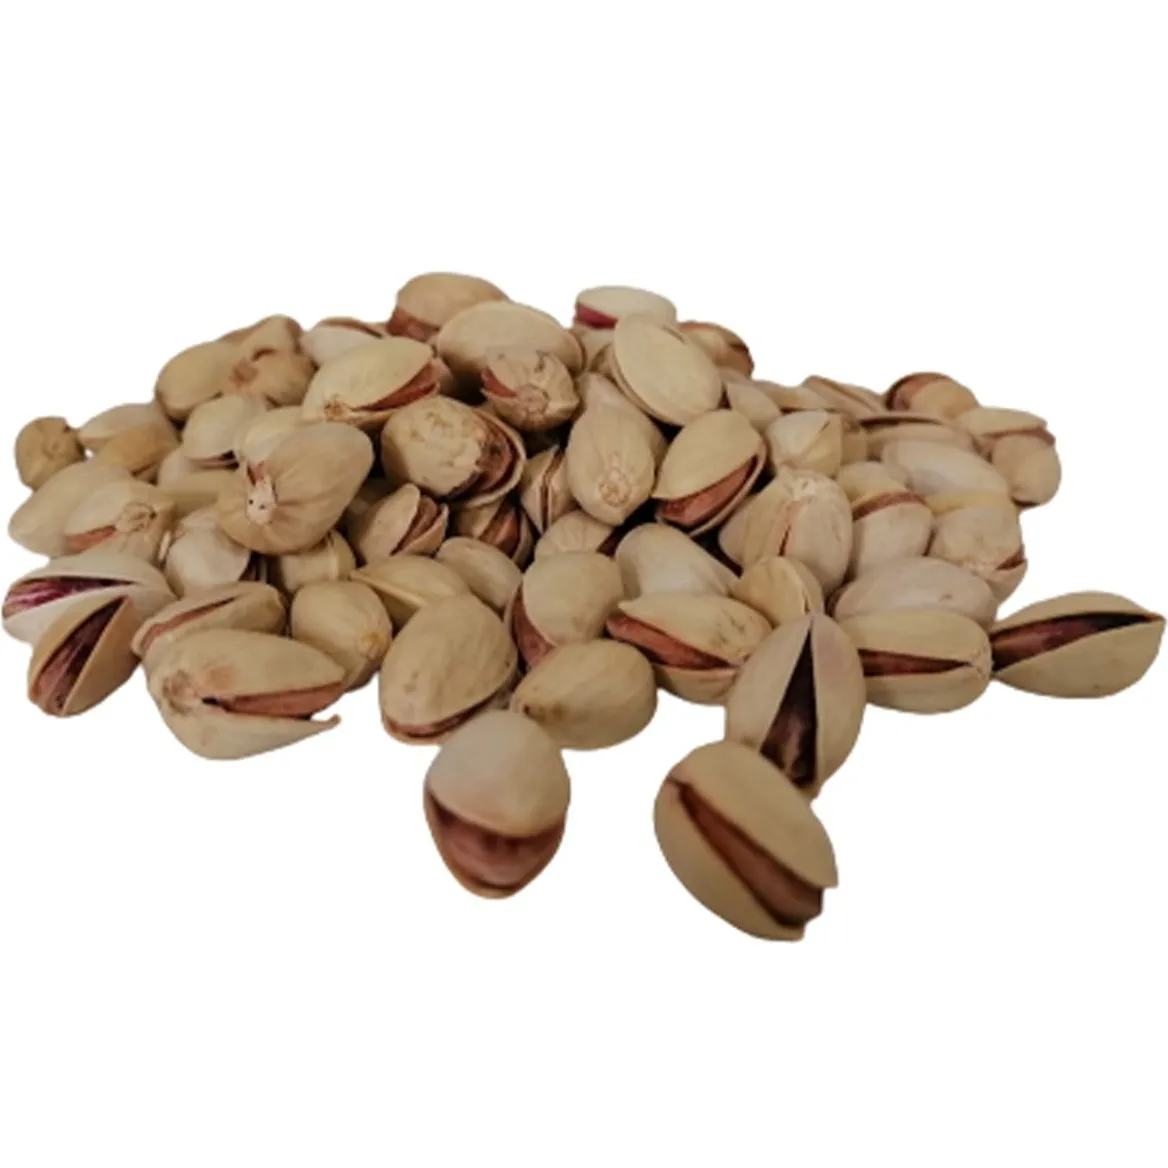 The purchase price of Iranian pistachios Canada + properties, disadvantages and advantages